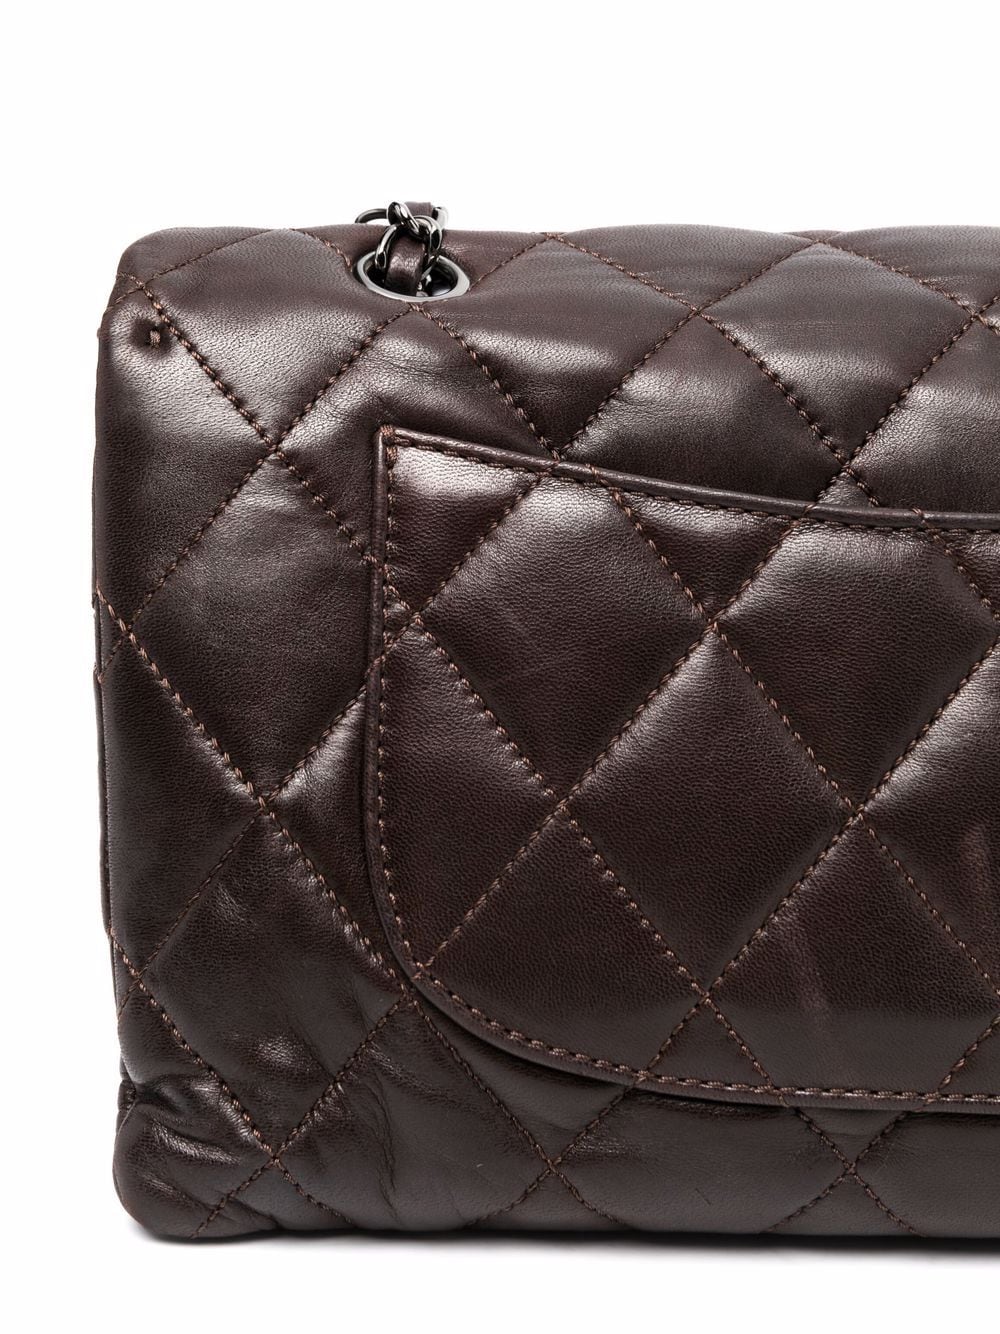 Chanel Pre-owned 2011 Classic Flap Shoulder Bag - Brown